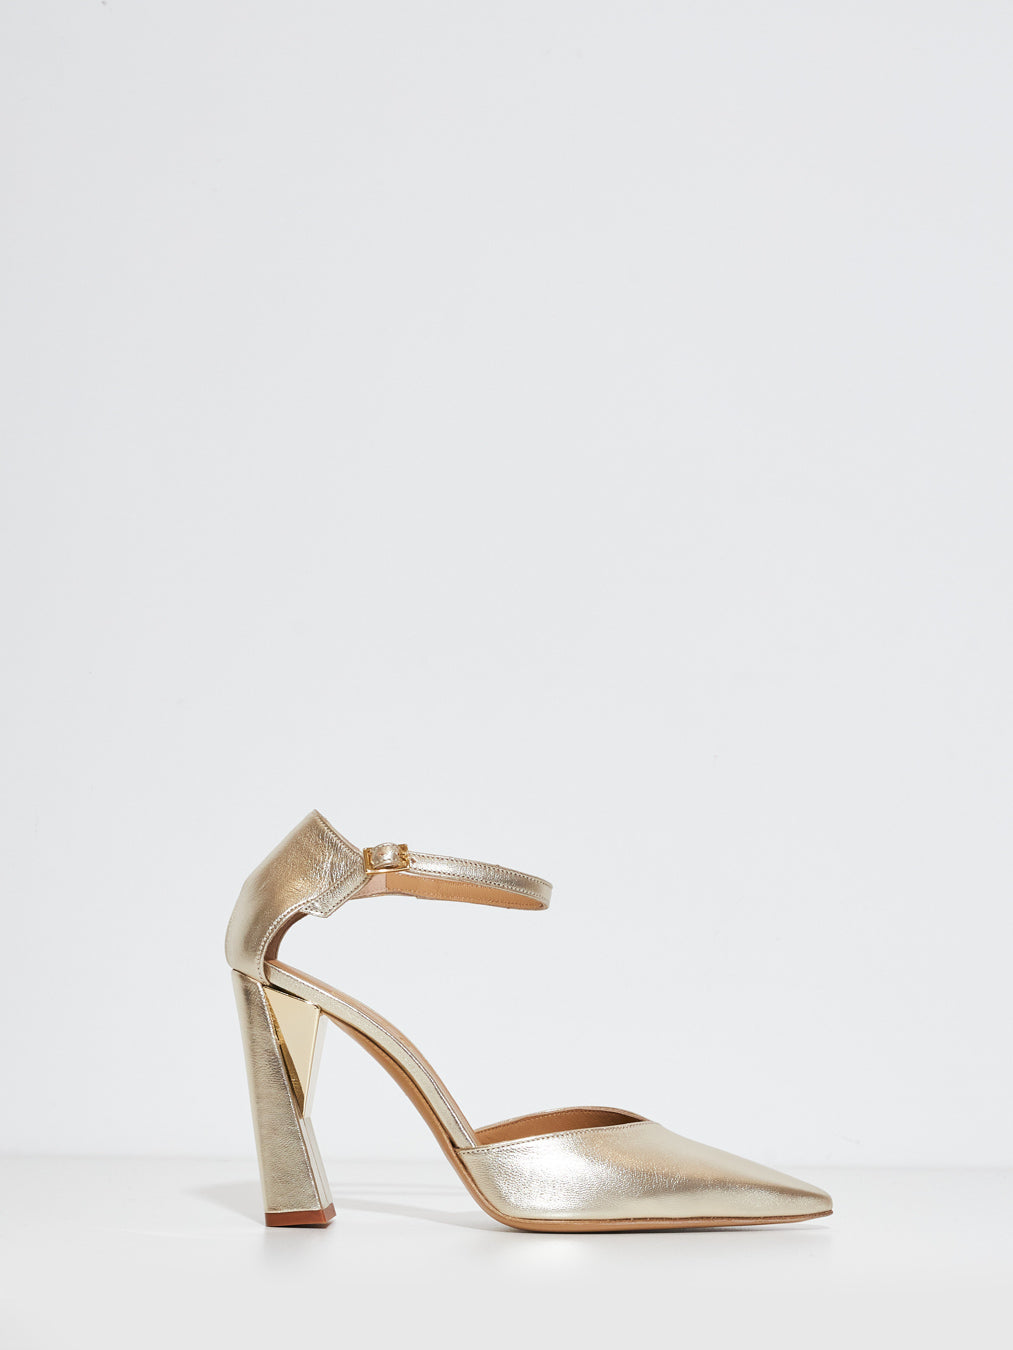 Wo Milano pumps with gold ankle strap